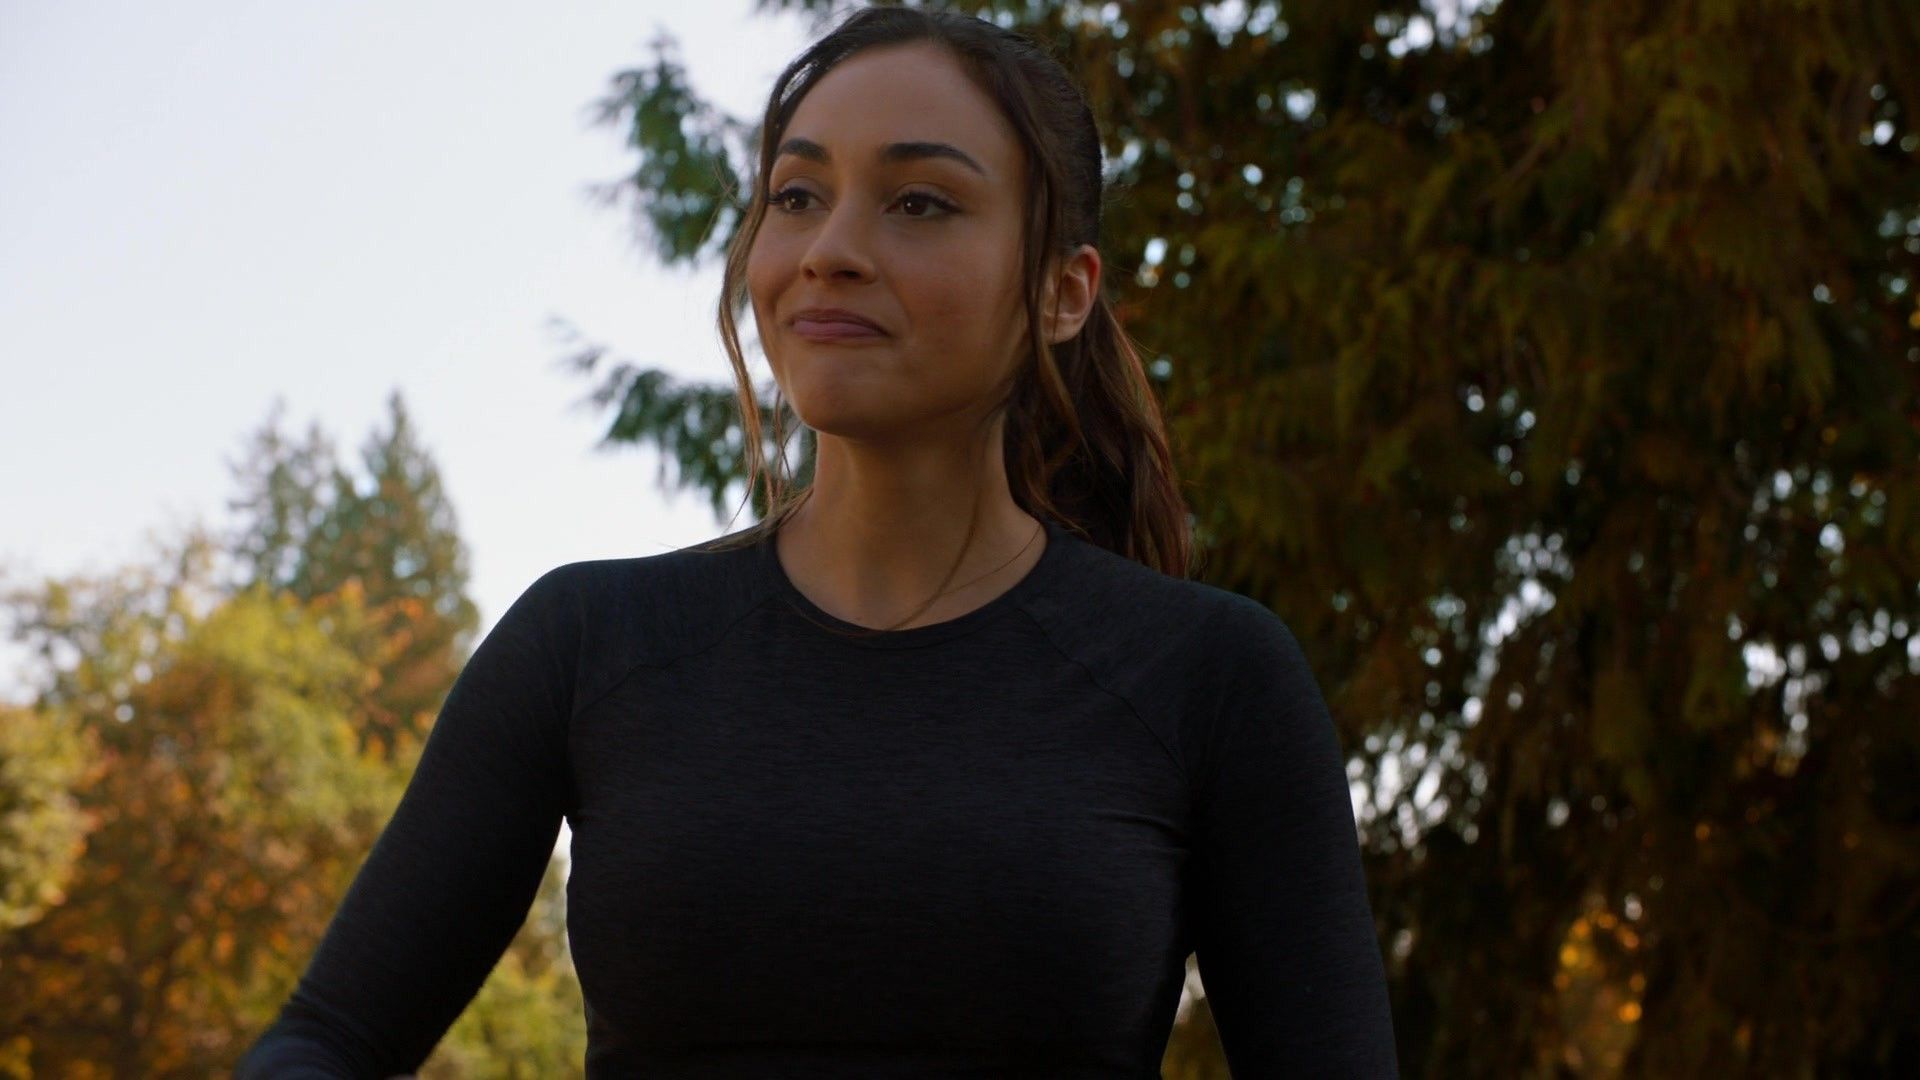 Raven Reyes from "The 100" poses in the same planet as Echo.